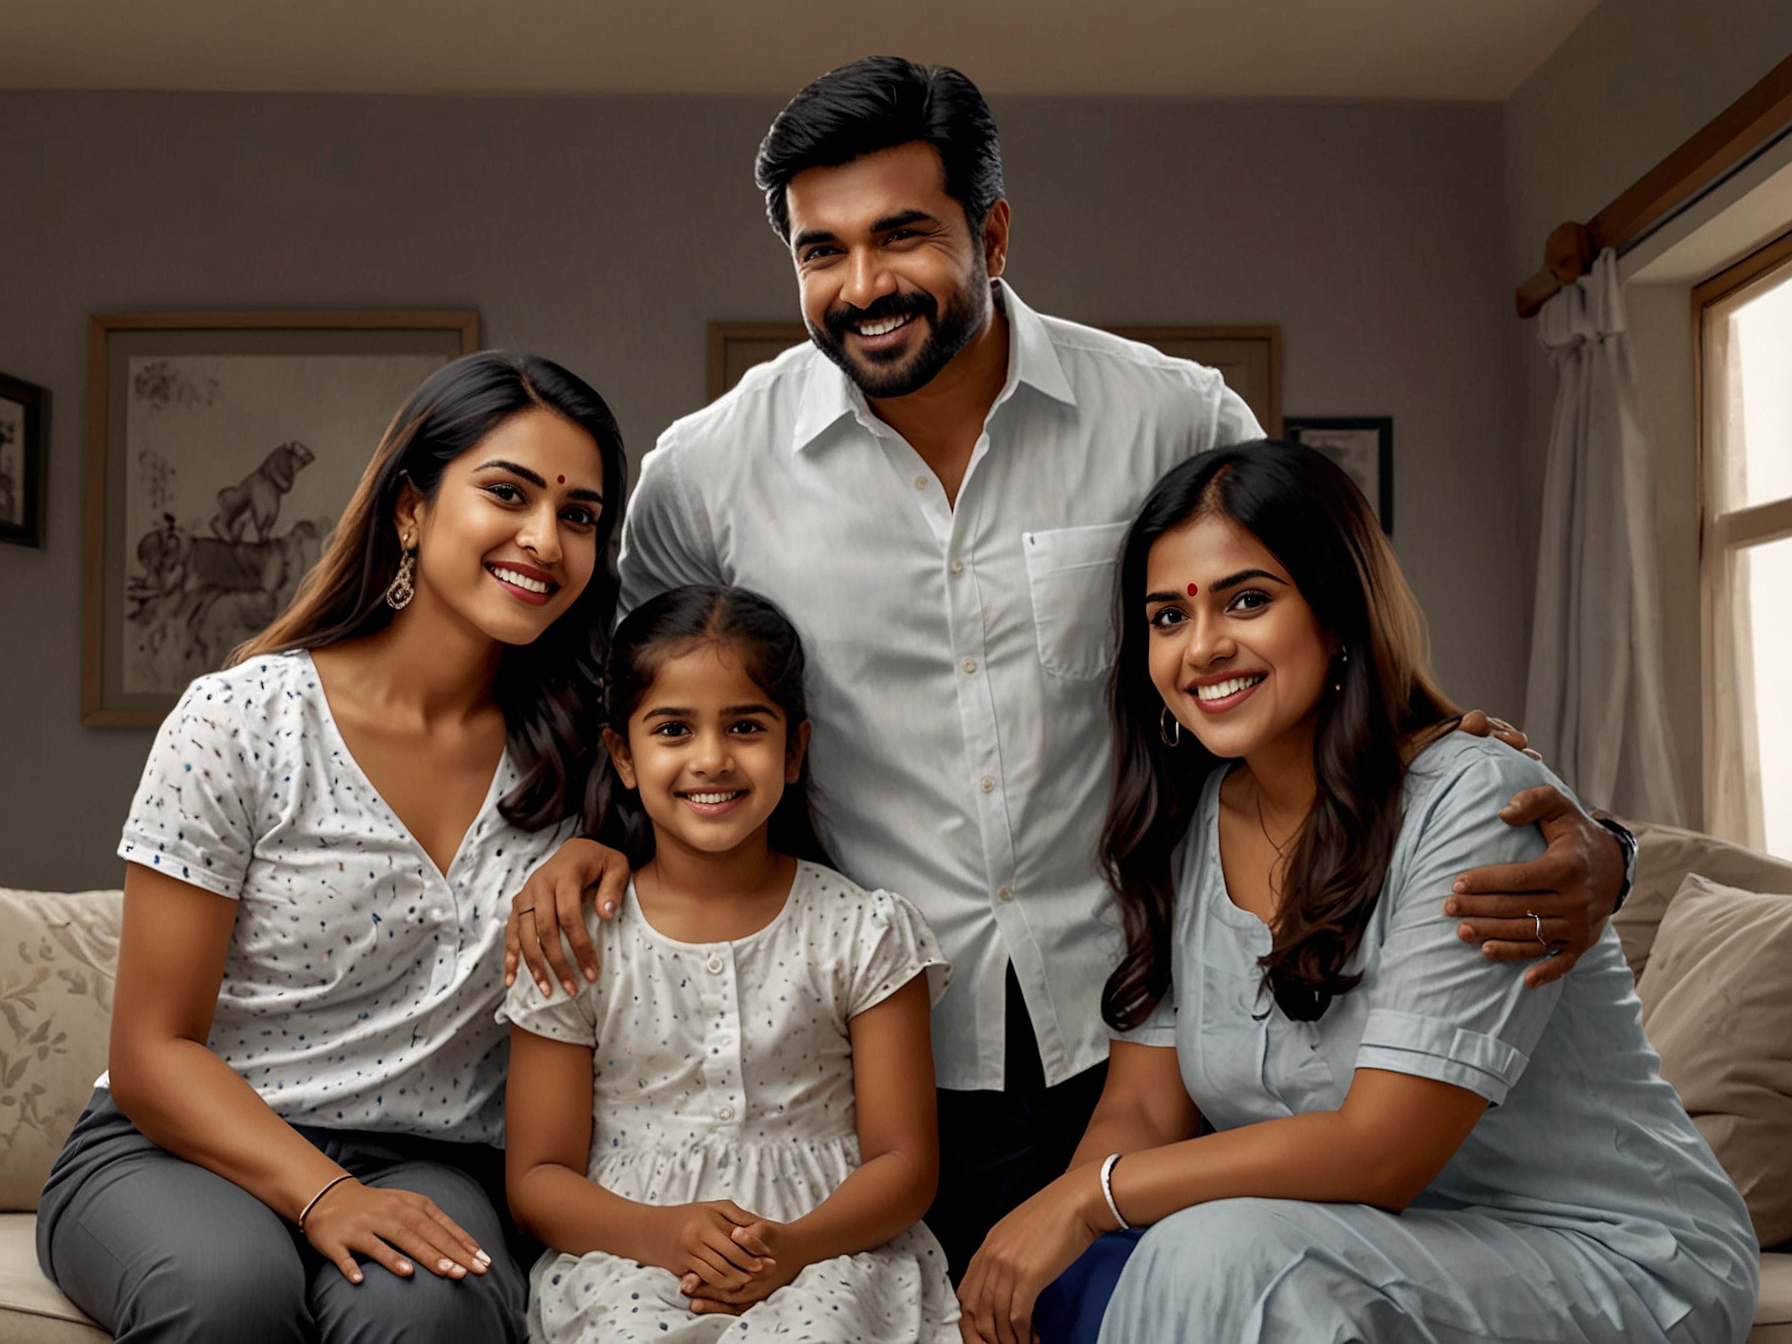 Ram Charan with his family in an intimate setting, sharing joy and precious moments together, away from the public eye, emphasizing the importance of family support in his life.